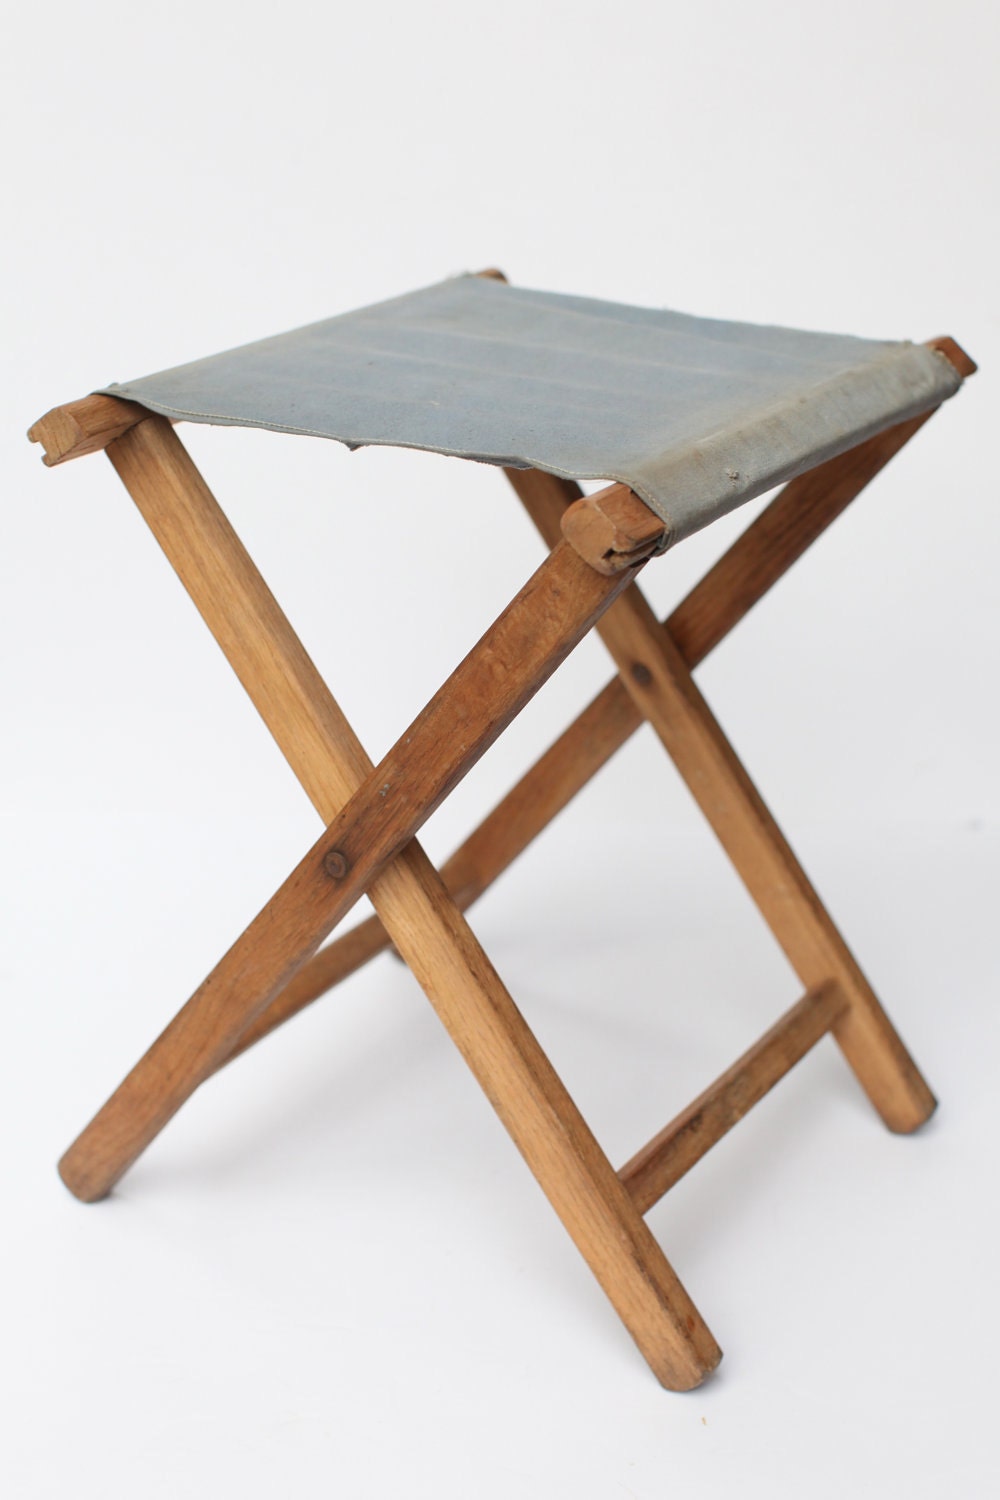 Wooden folding camp stool by thisvintagething on Etsy